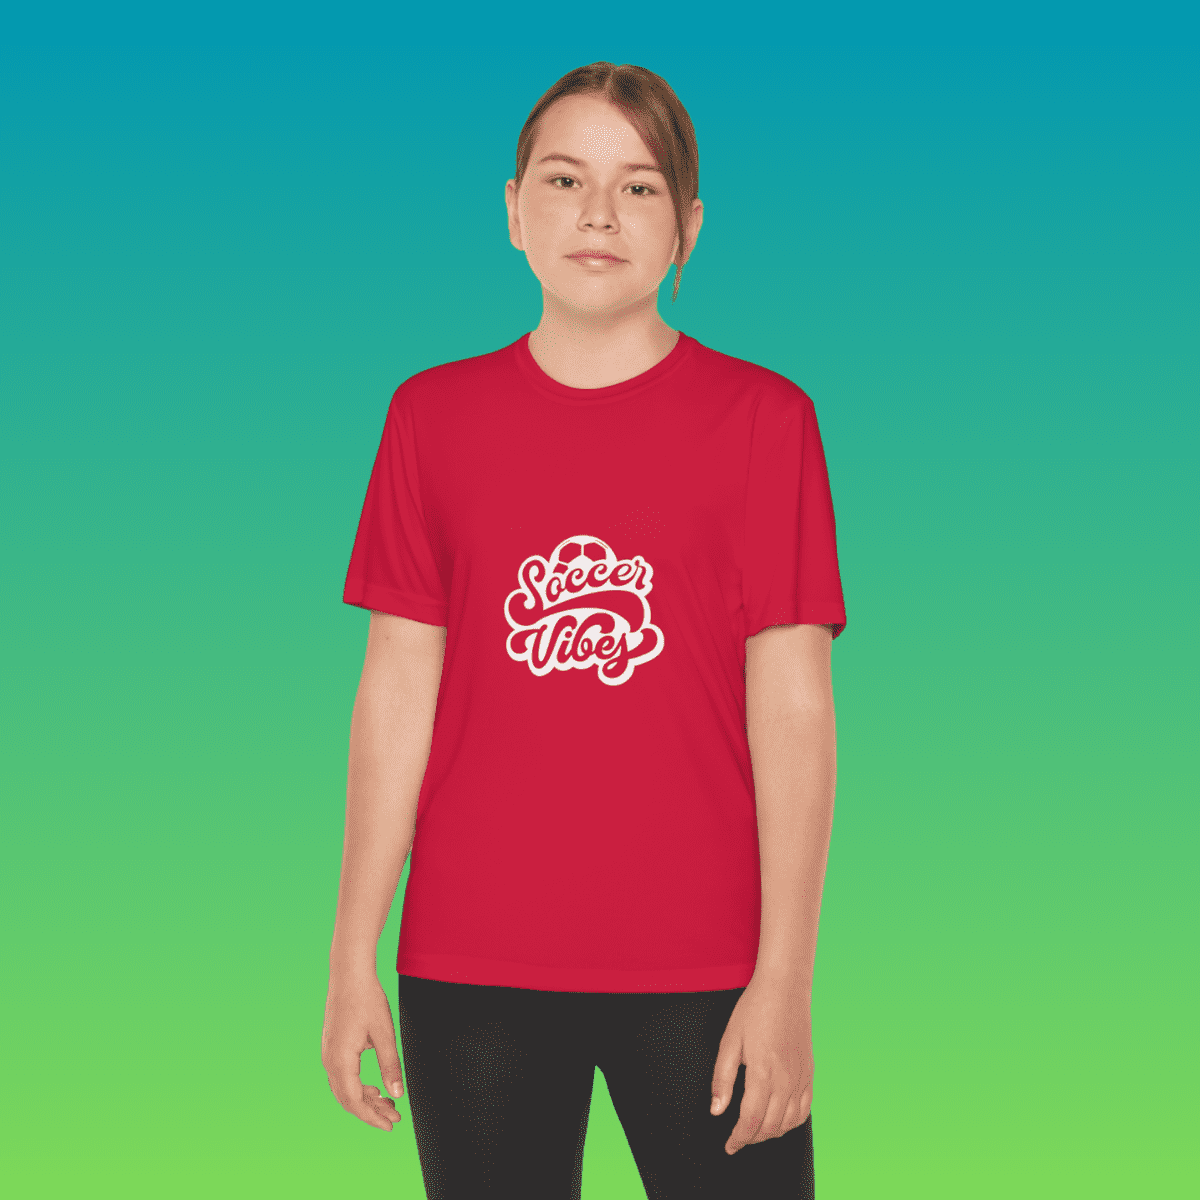 Red Youth Soccer Vibes Moisture-Wicking Tee